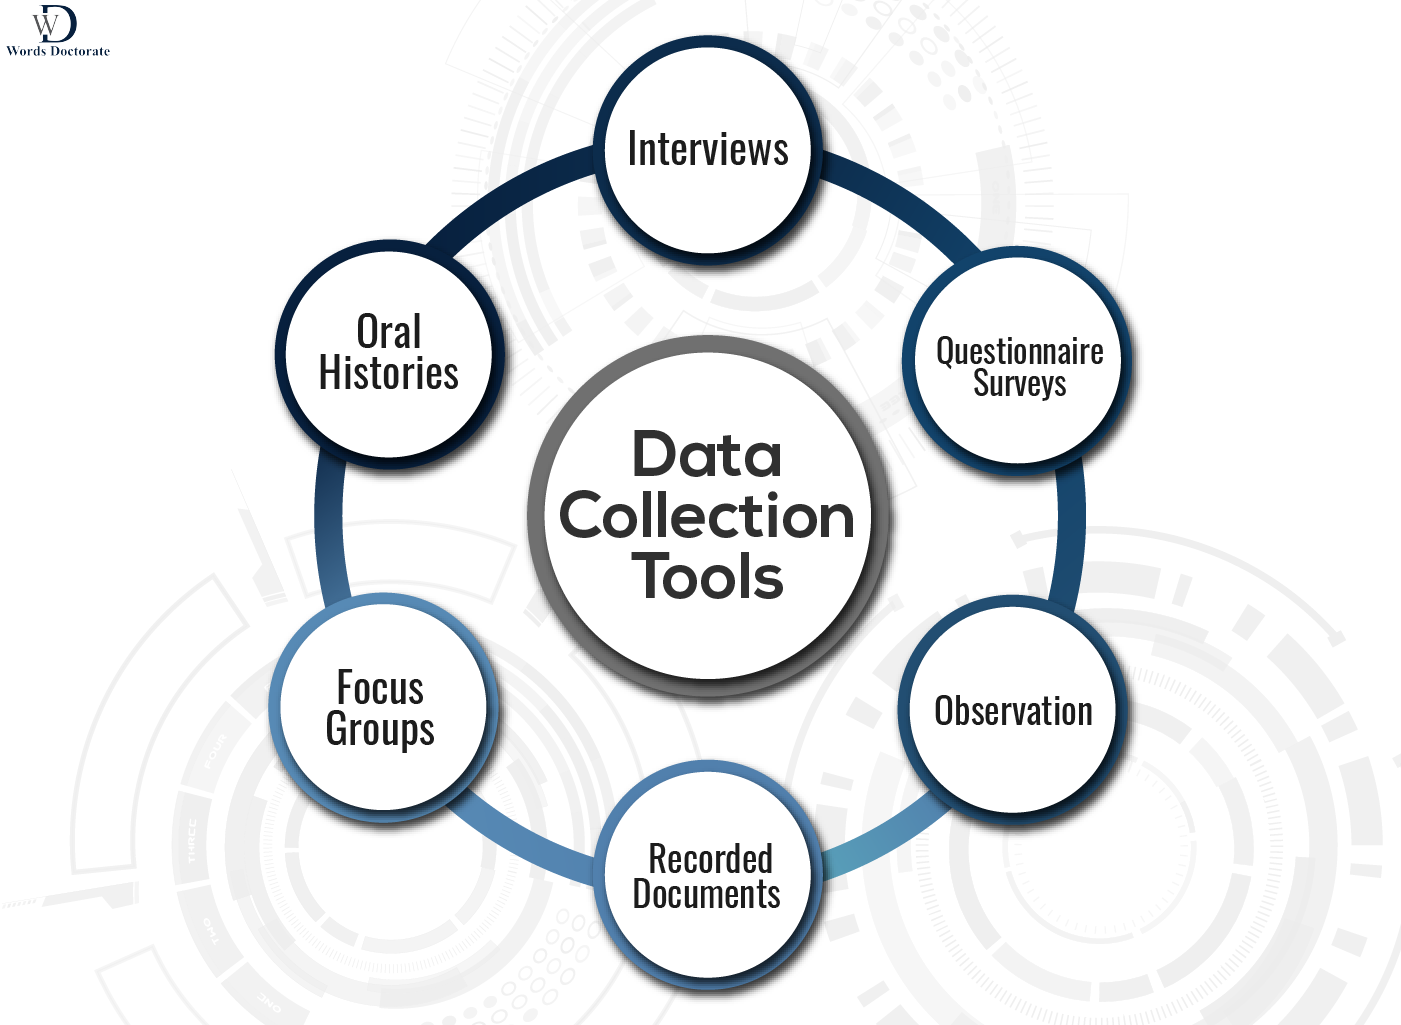 The relevant tools needed for the collection of data are